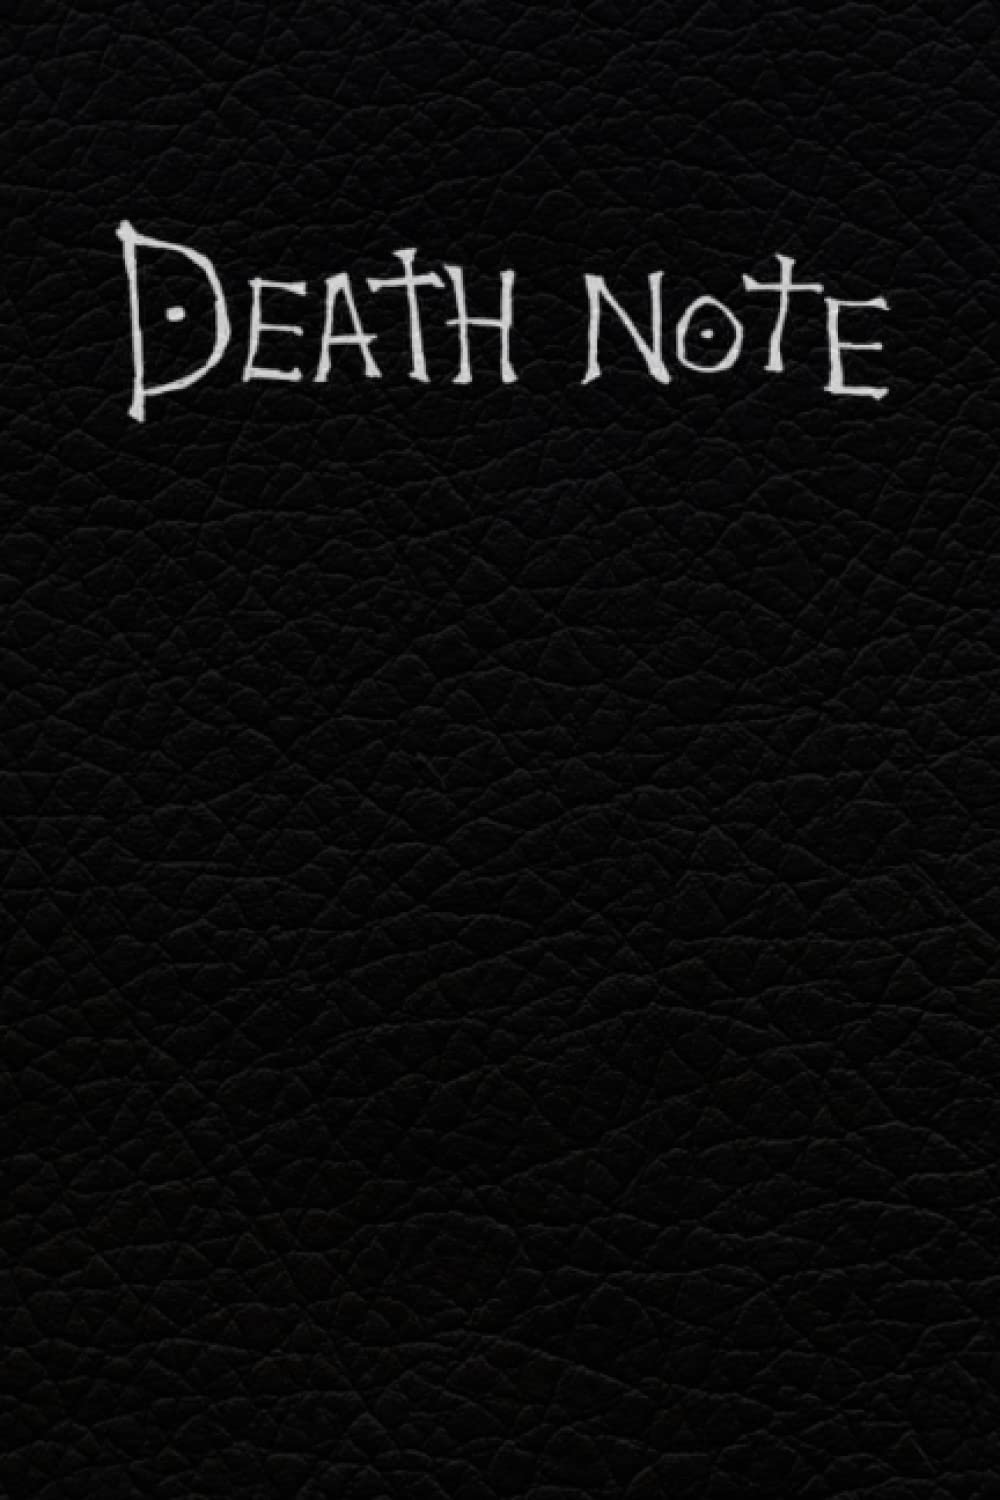 HOW TO] DIY DARK ANIME NOTEBOOKS ❤ DEATH NOTE | EVANGELION | TOKYO GHOUL |  FMA - YouTube